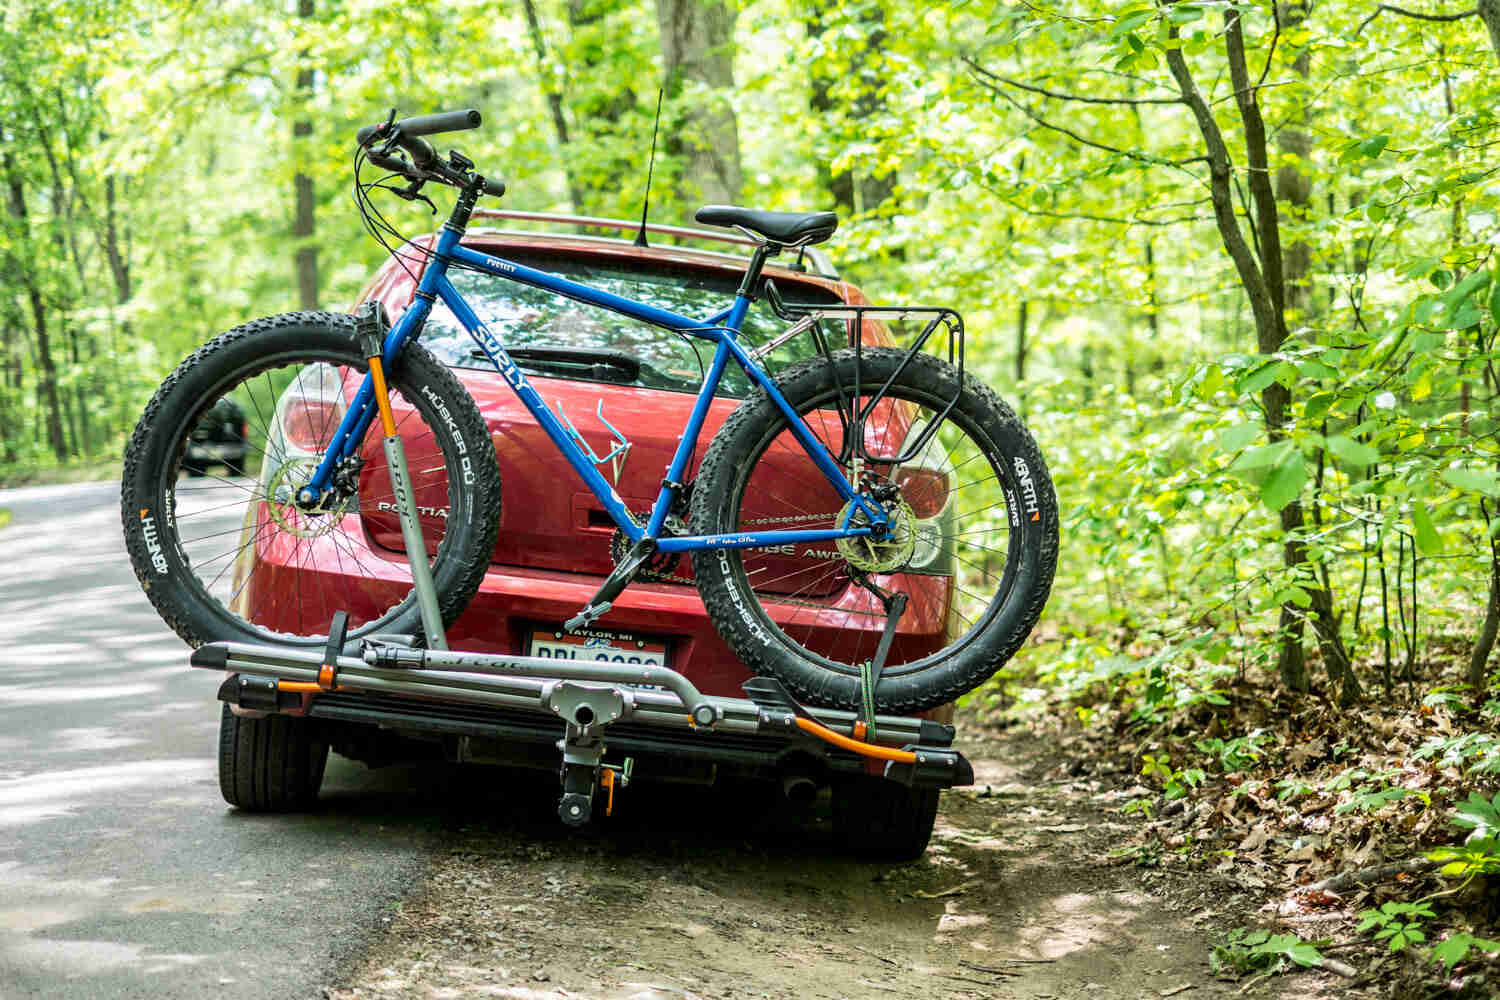 Left side view of a blue Surly Pugsley fat bike, on a rack mounted to the back of a vehicle, on a roadside in the forest